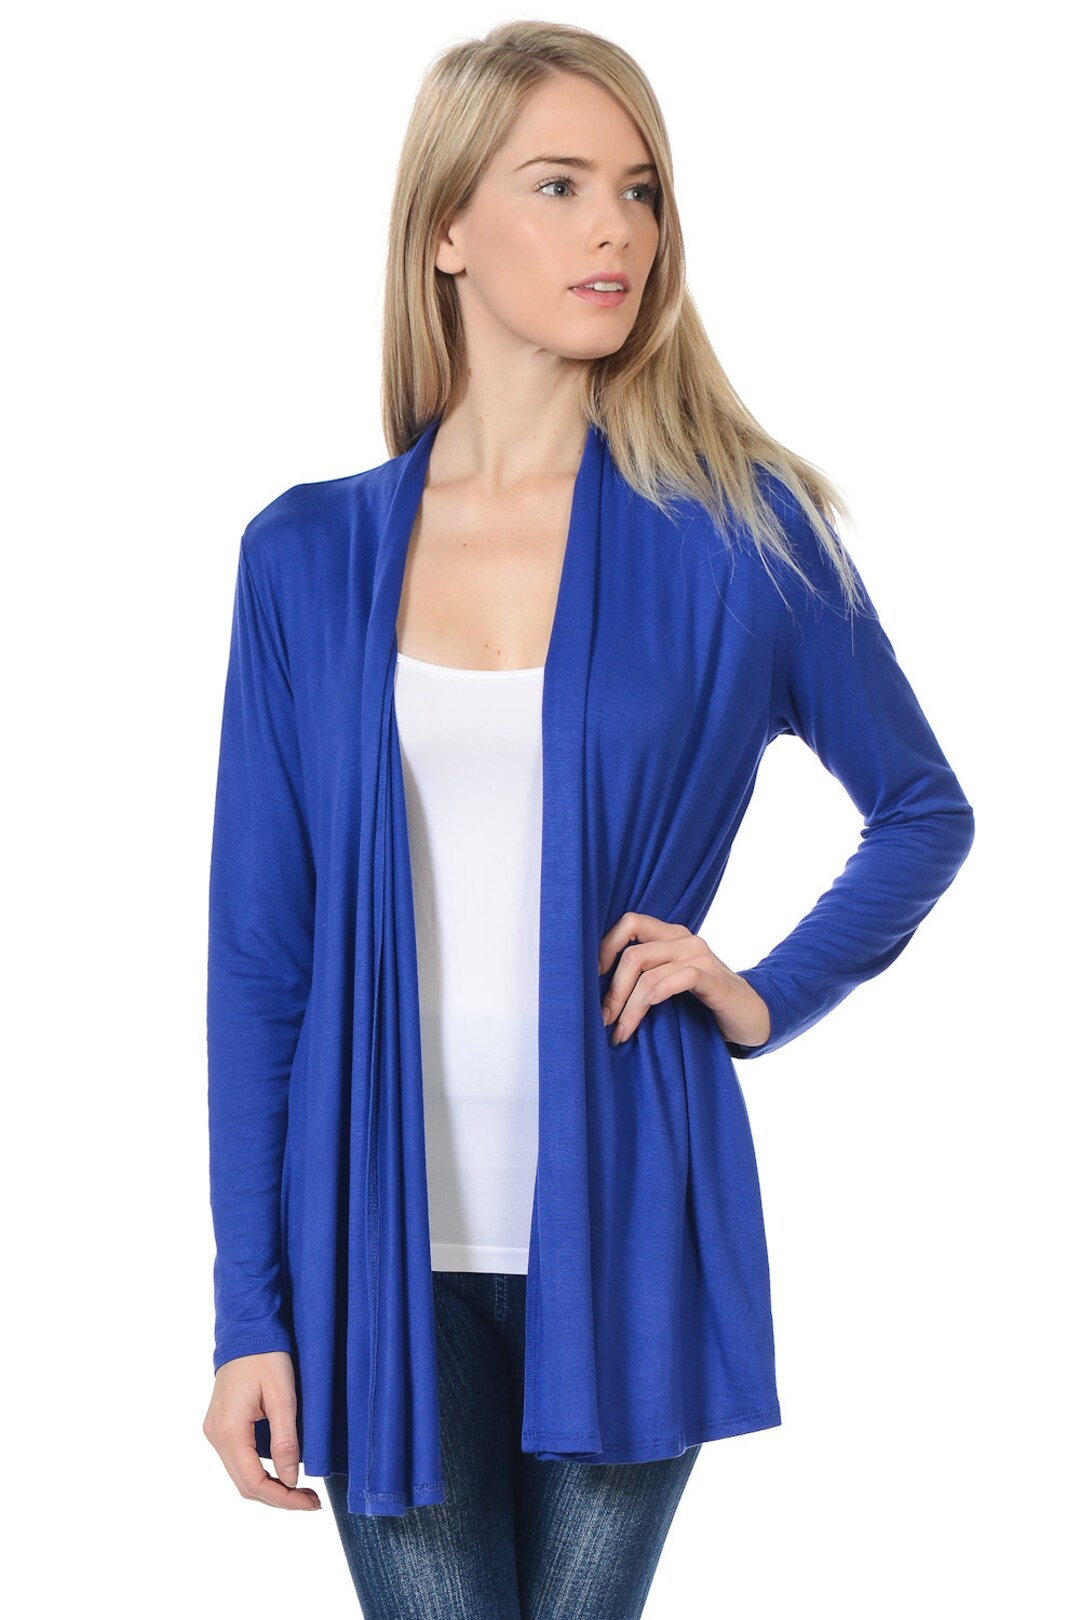 Solid Rayon Spandex Long Sleeve Jersey Cardigan Sweater Royal Blue - Etsy